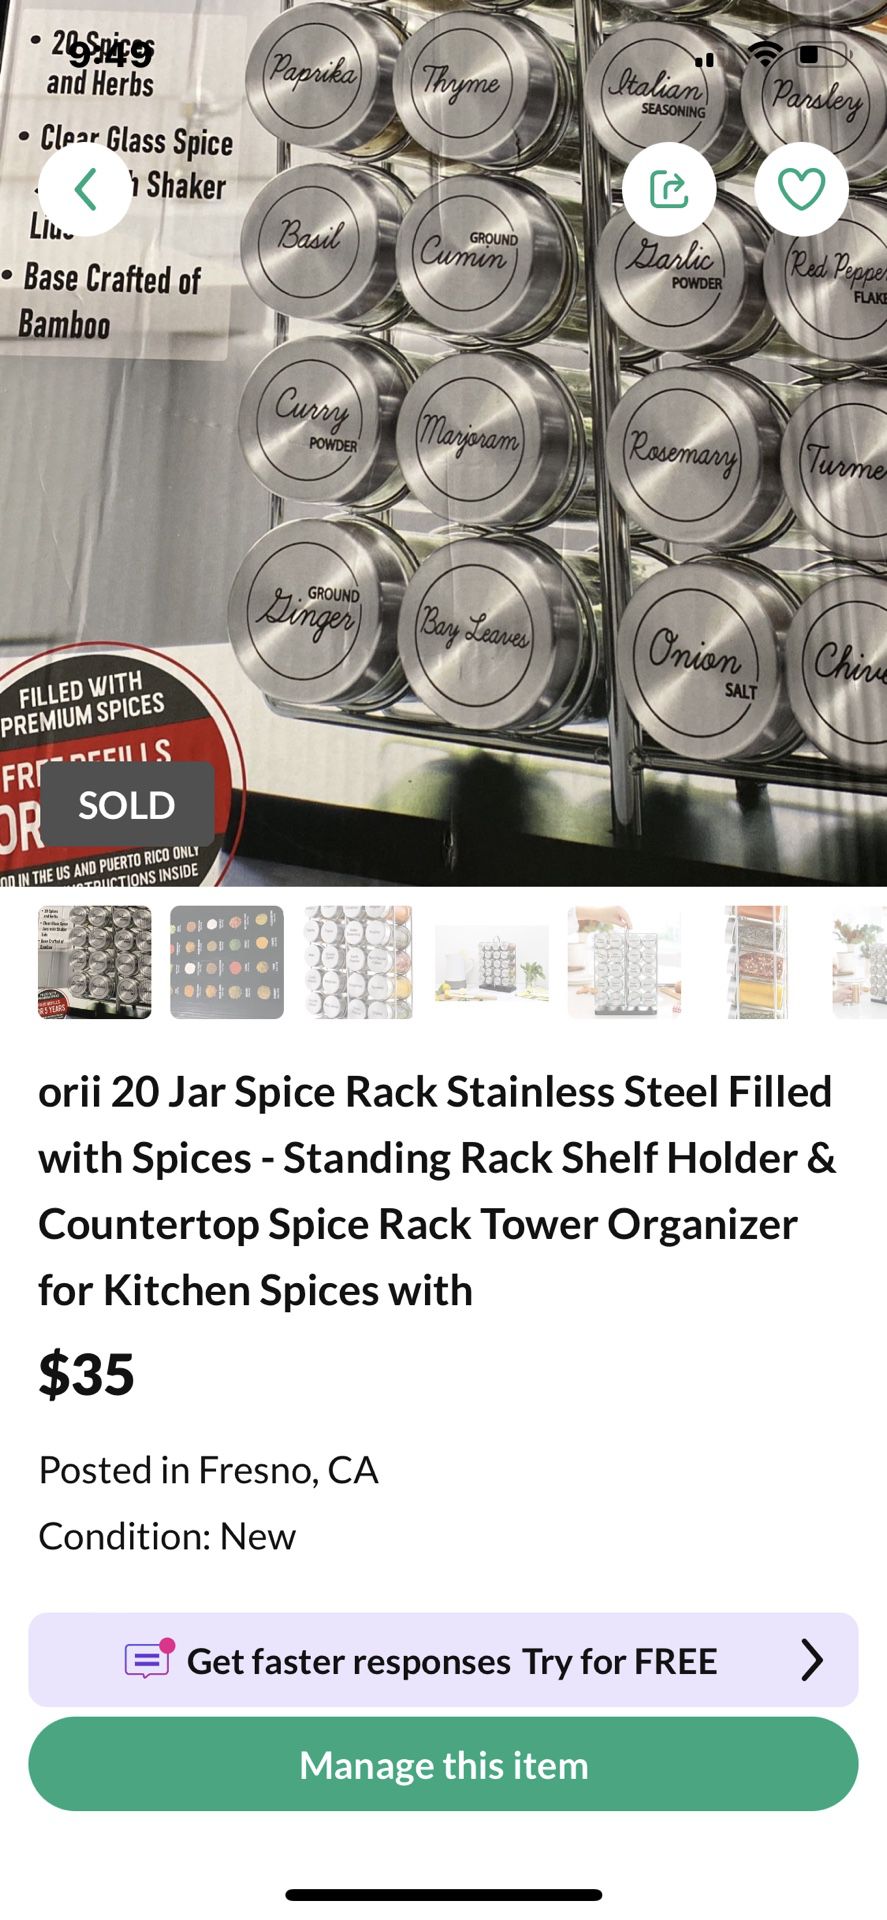 orii 20 Jar Spice Rack Stainless Steel Filled with Spices - Standing Rack Shelf Holder & Countertop Spice Rack Tower Organizer for Kitchen Spices with